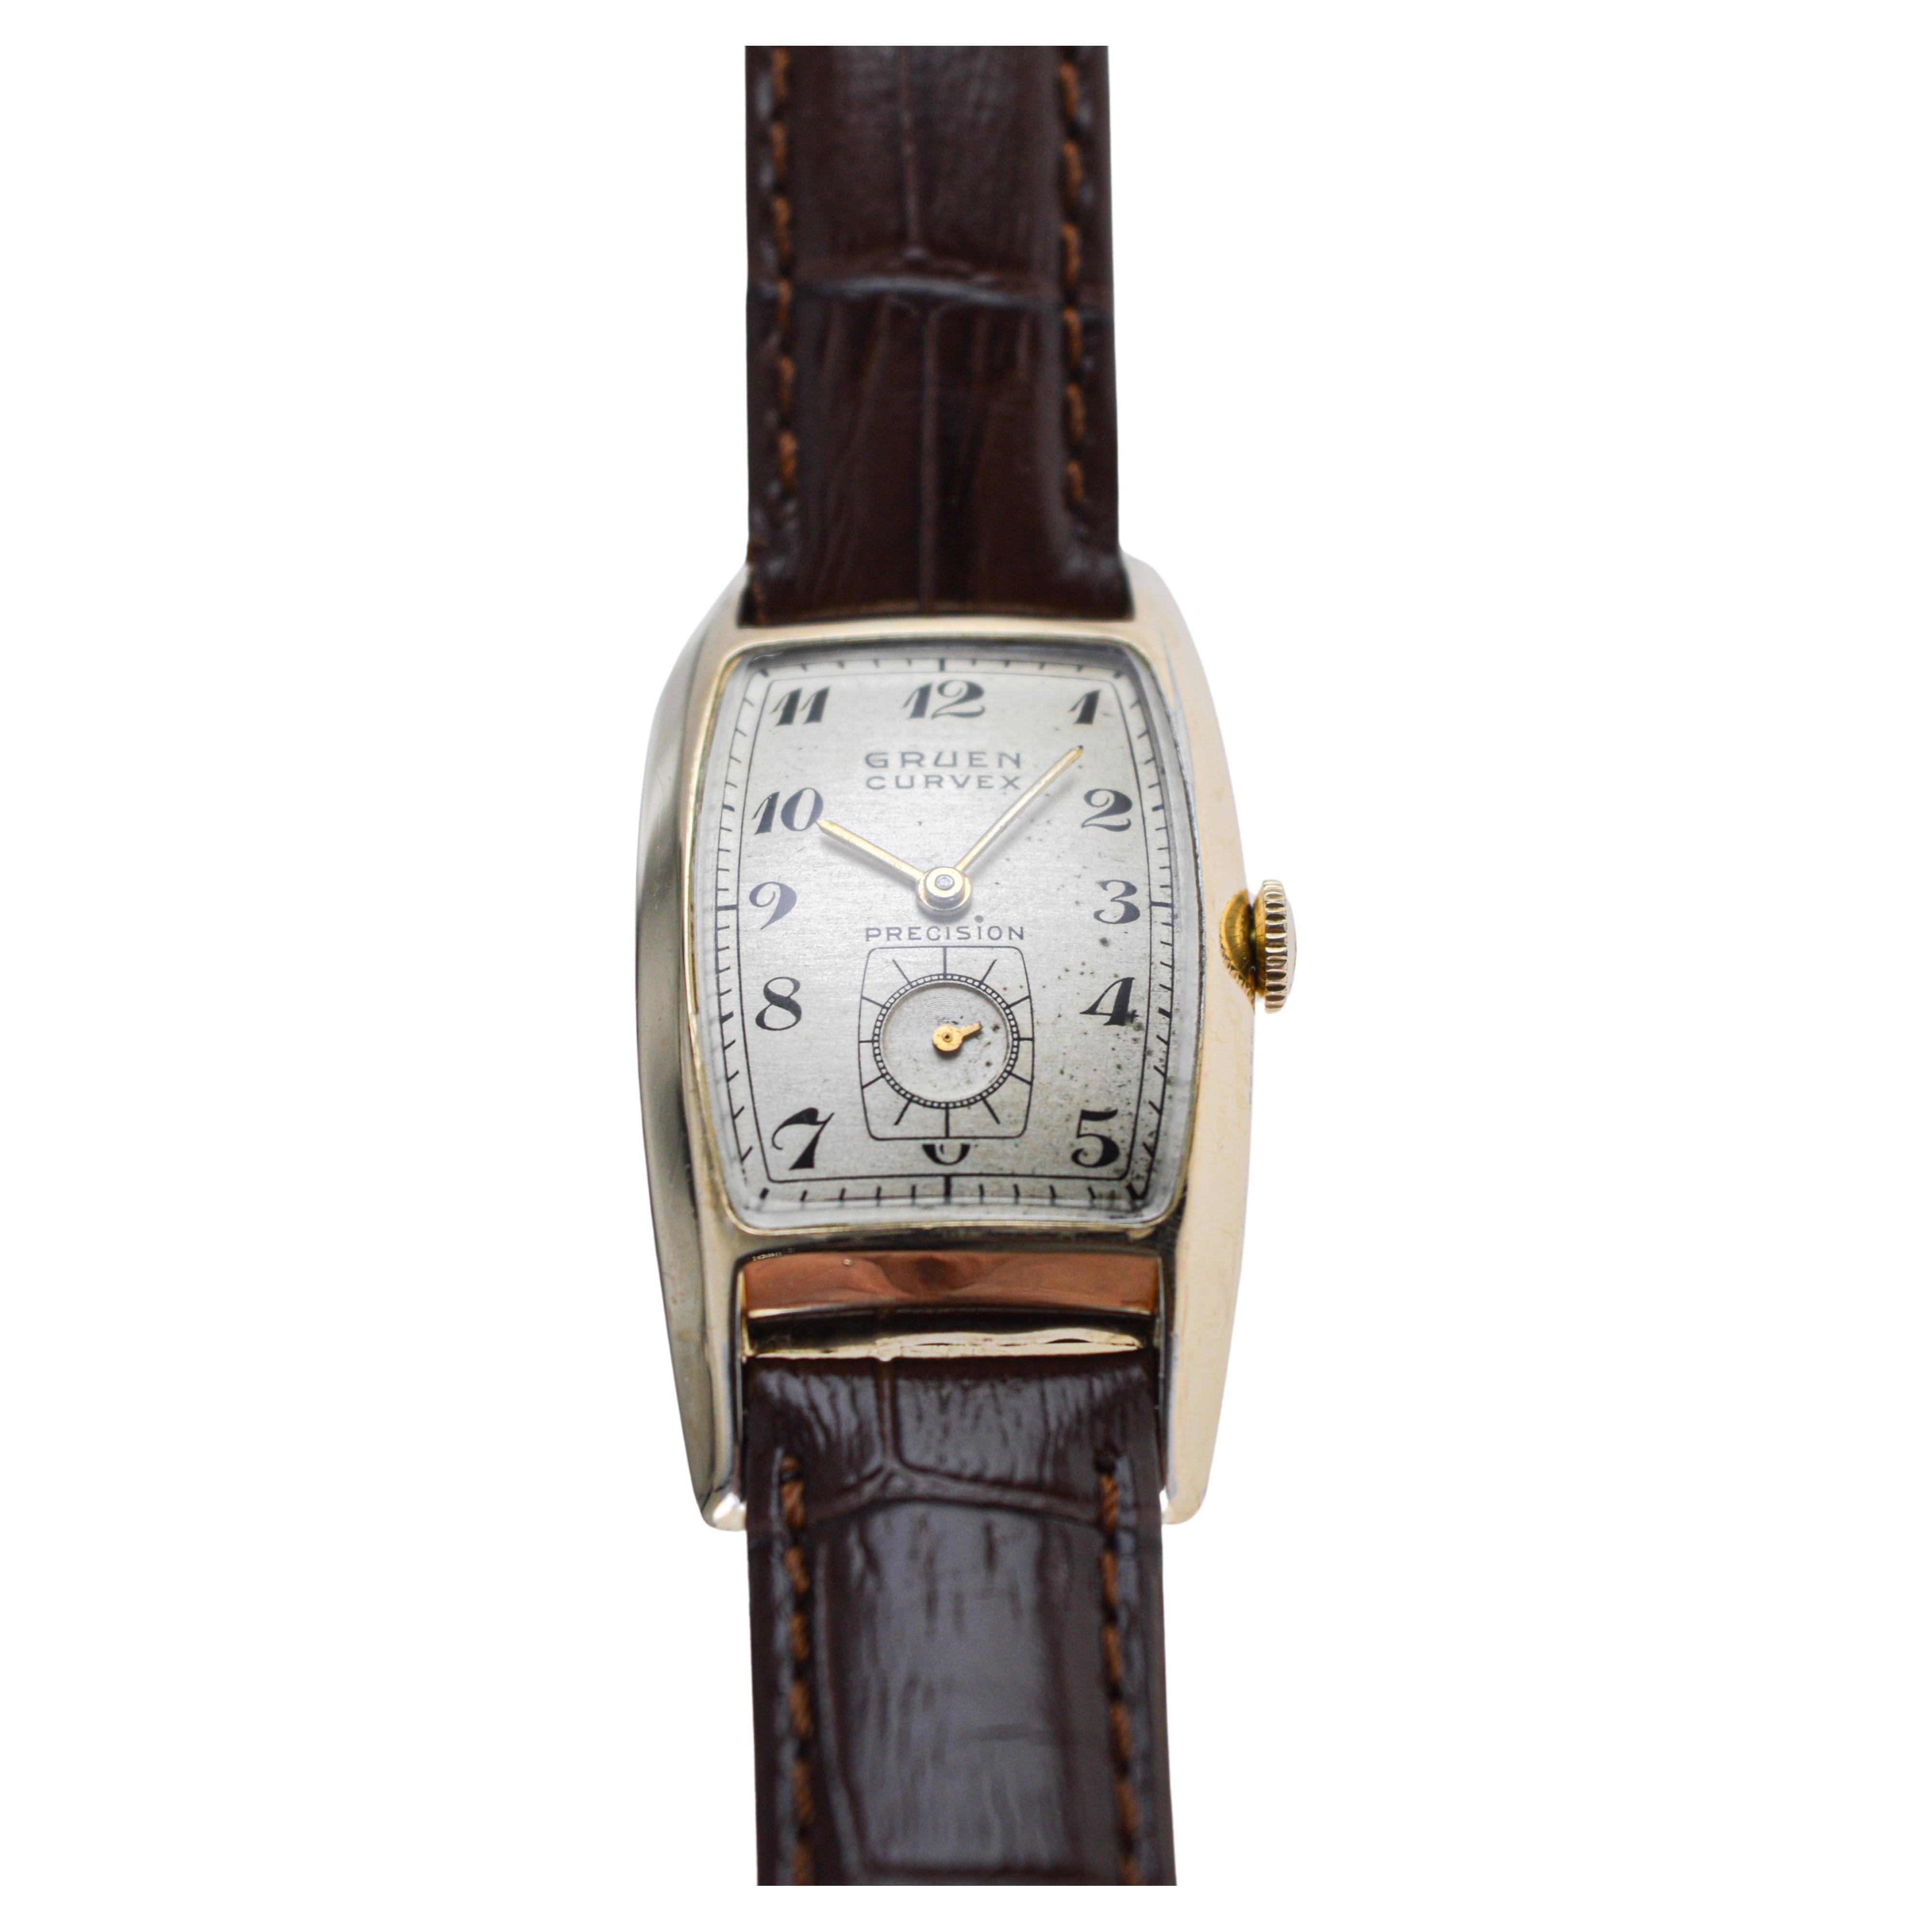 Gruen Gold Filled Art Deco Curvex Style Watch with Original Dial circa 1940's For Sale 1